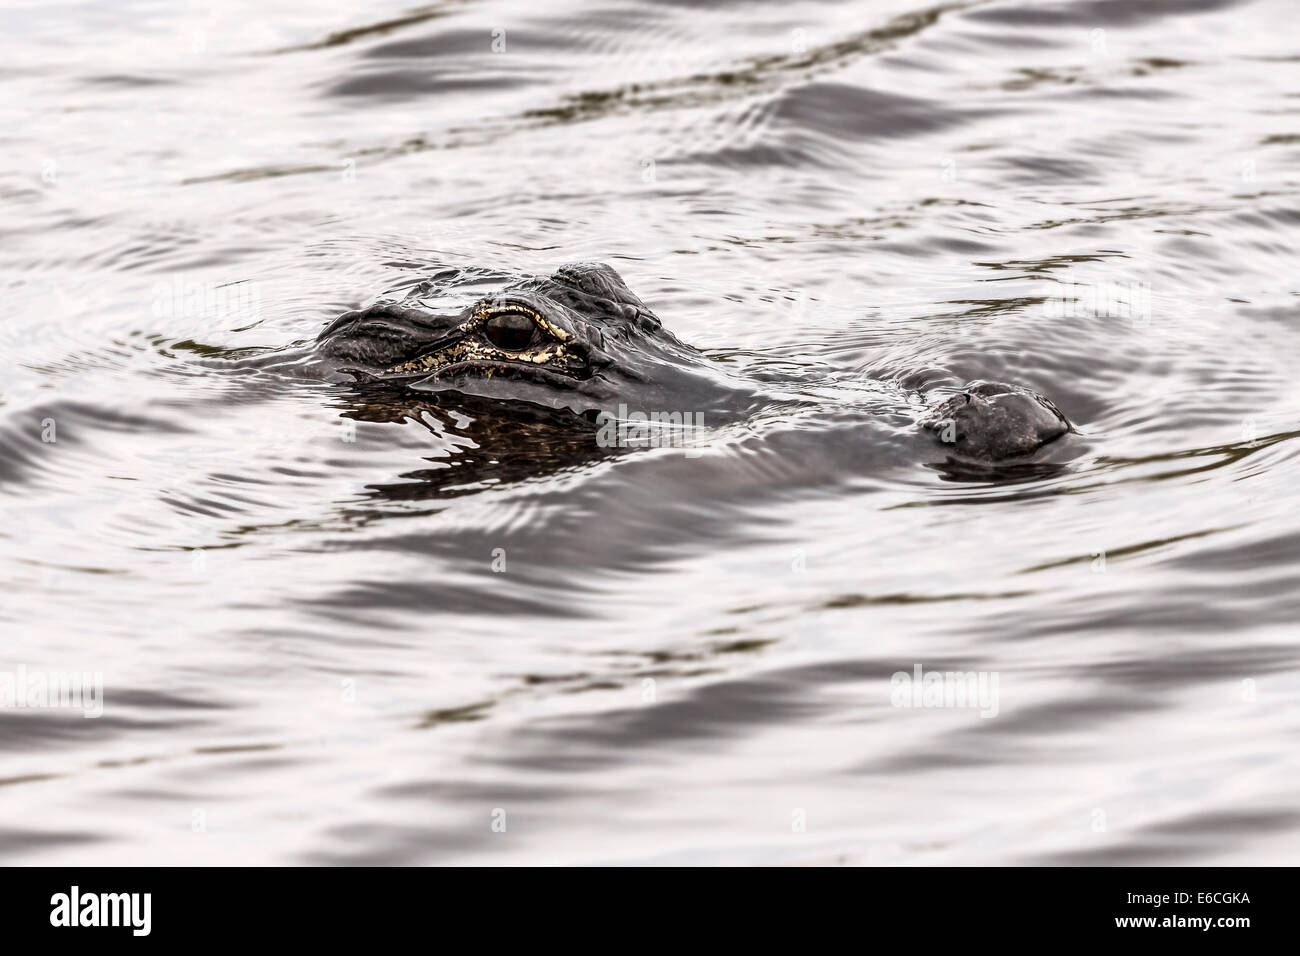 Closeup picture of hunting cayman in water, Everglades National Park, USA. Stock Photo